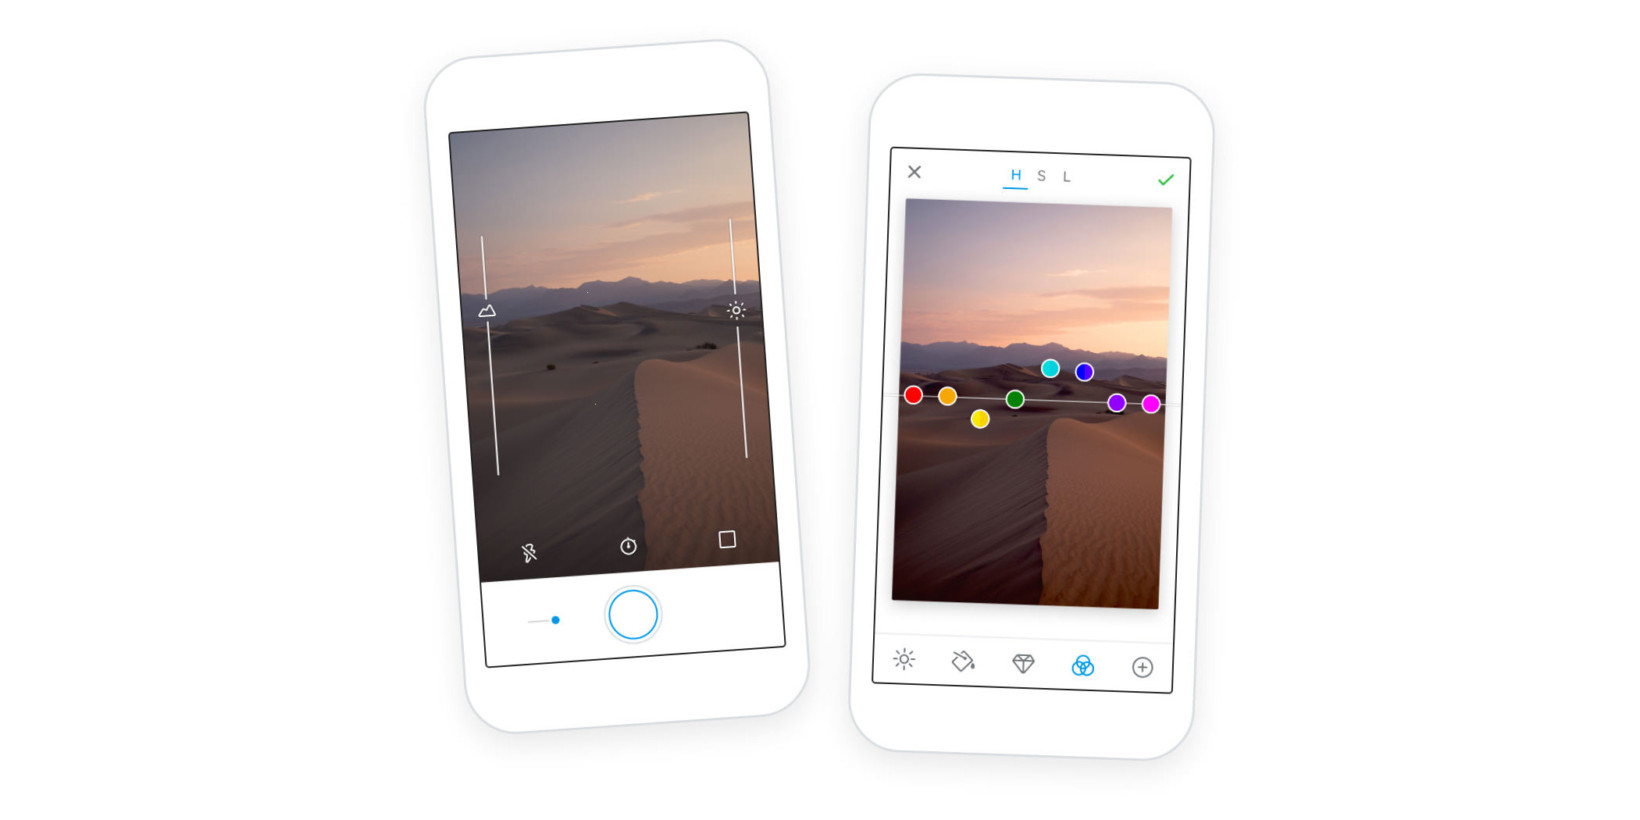 500px S New Ios Camera App Lets You Earn Money For Your Photos Right From Your Phone